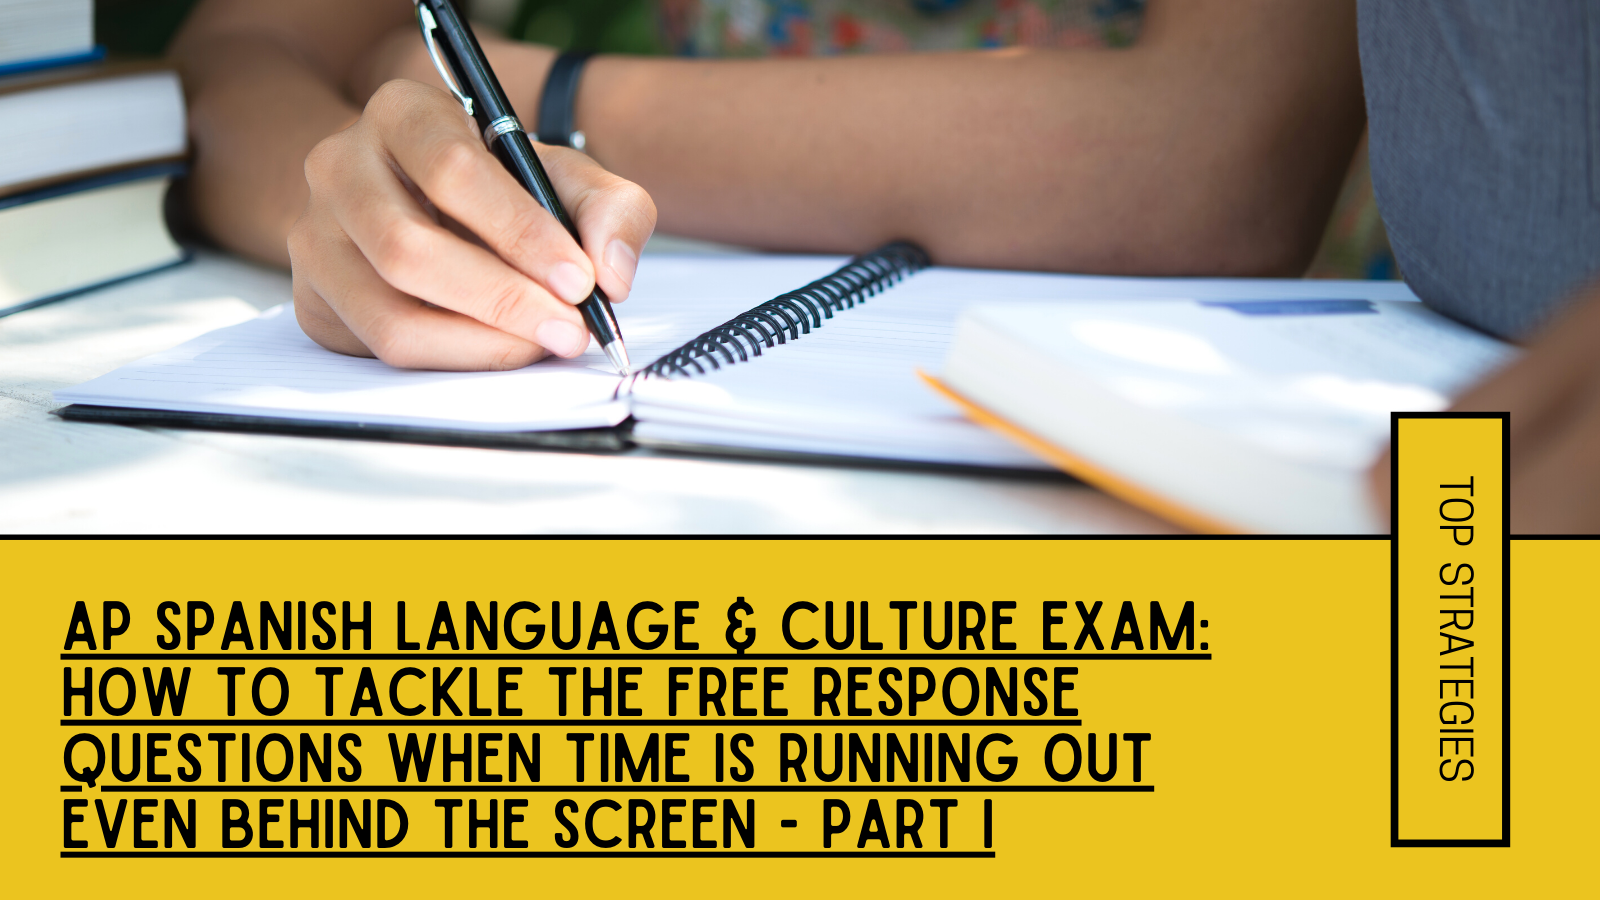 AP Spanish Language & Culture Exam How to Tackle the Free Response